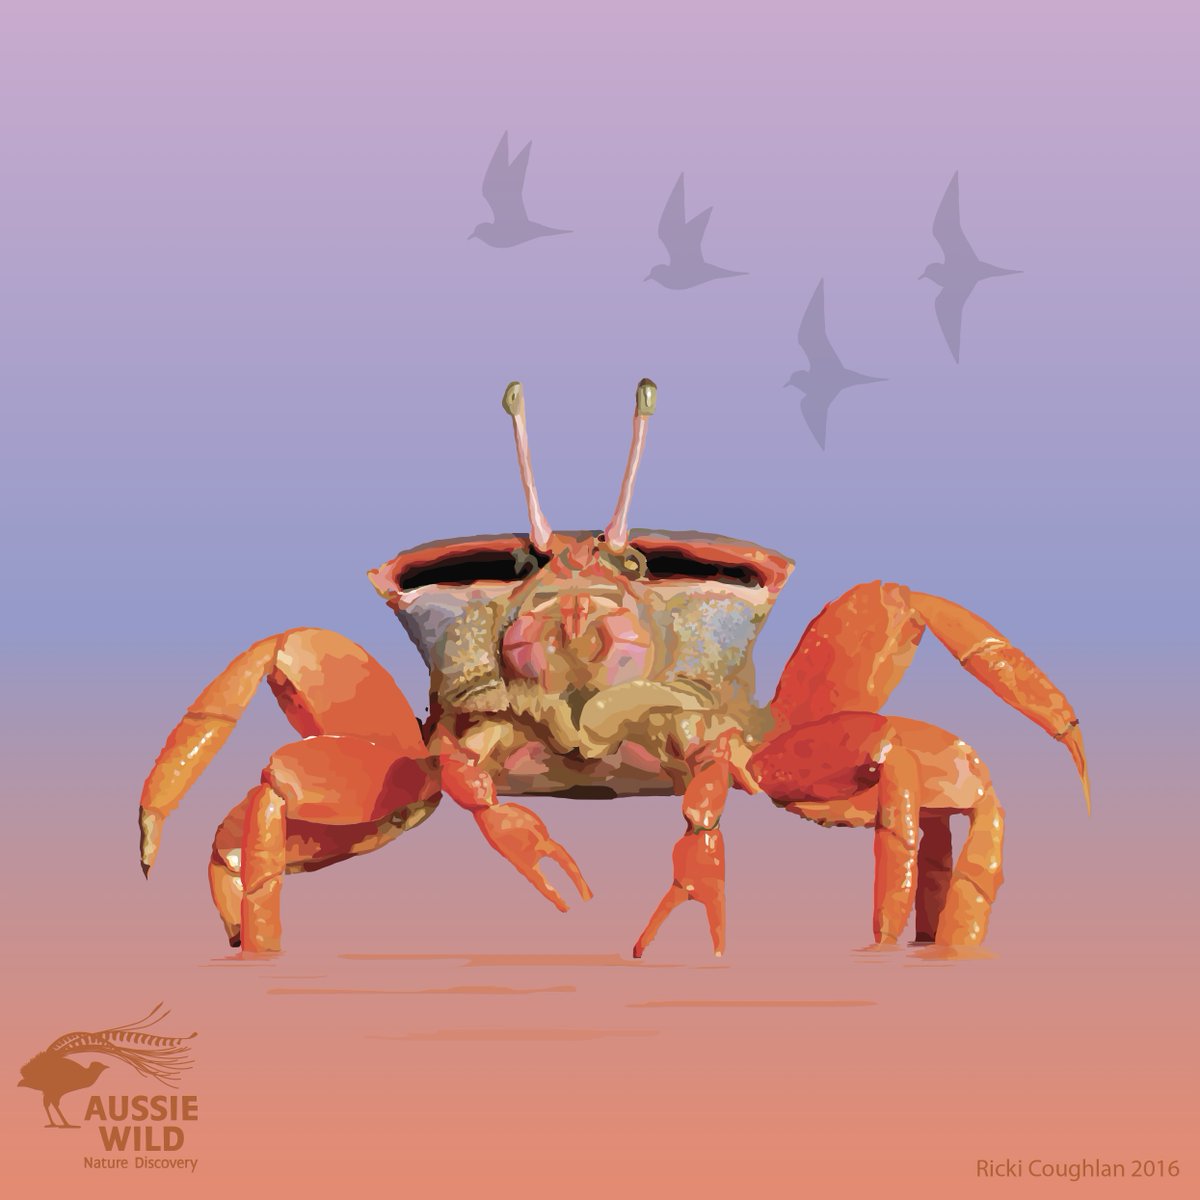 Flame Fiddler Crab . . . This species is highly abundant on the mudflats of Roebuck Bay, North Western Australia. I was inspired to create this by some of the images I took during my time as Warden at @BroomeBirdObs some years ago. #crab #crabbing #nature #WildOz